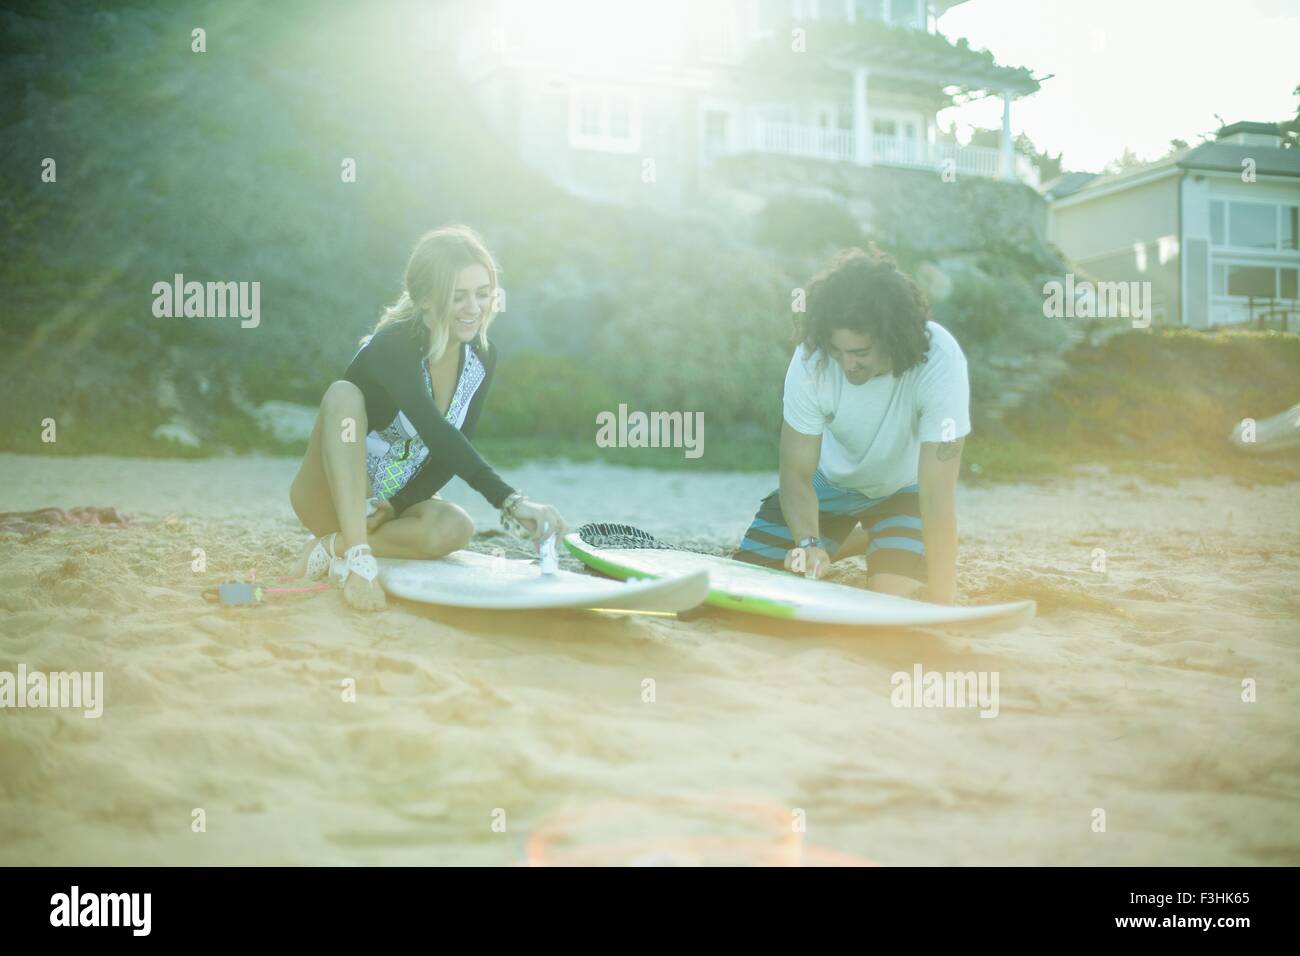 Couple sitting on beach, fartage surboards Banque D'Images